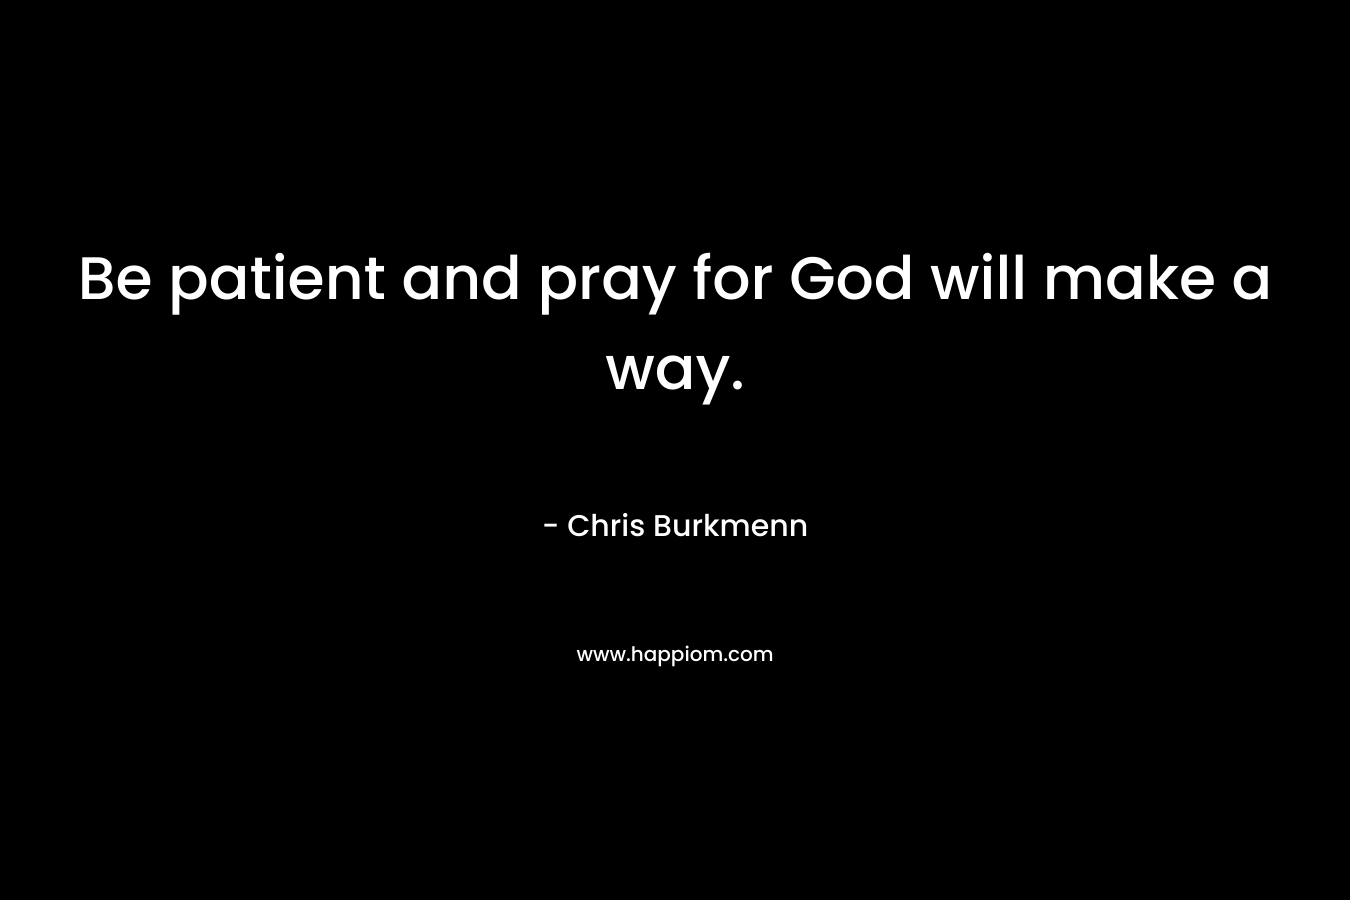 Be patient and pray for God will make a way.